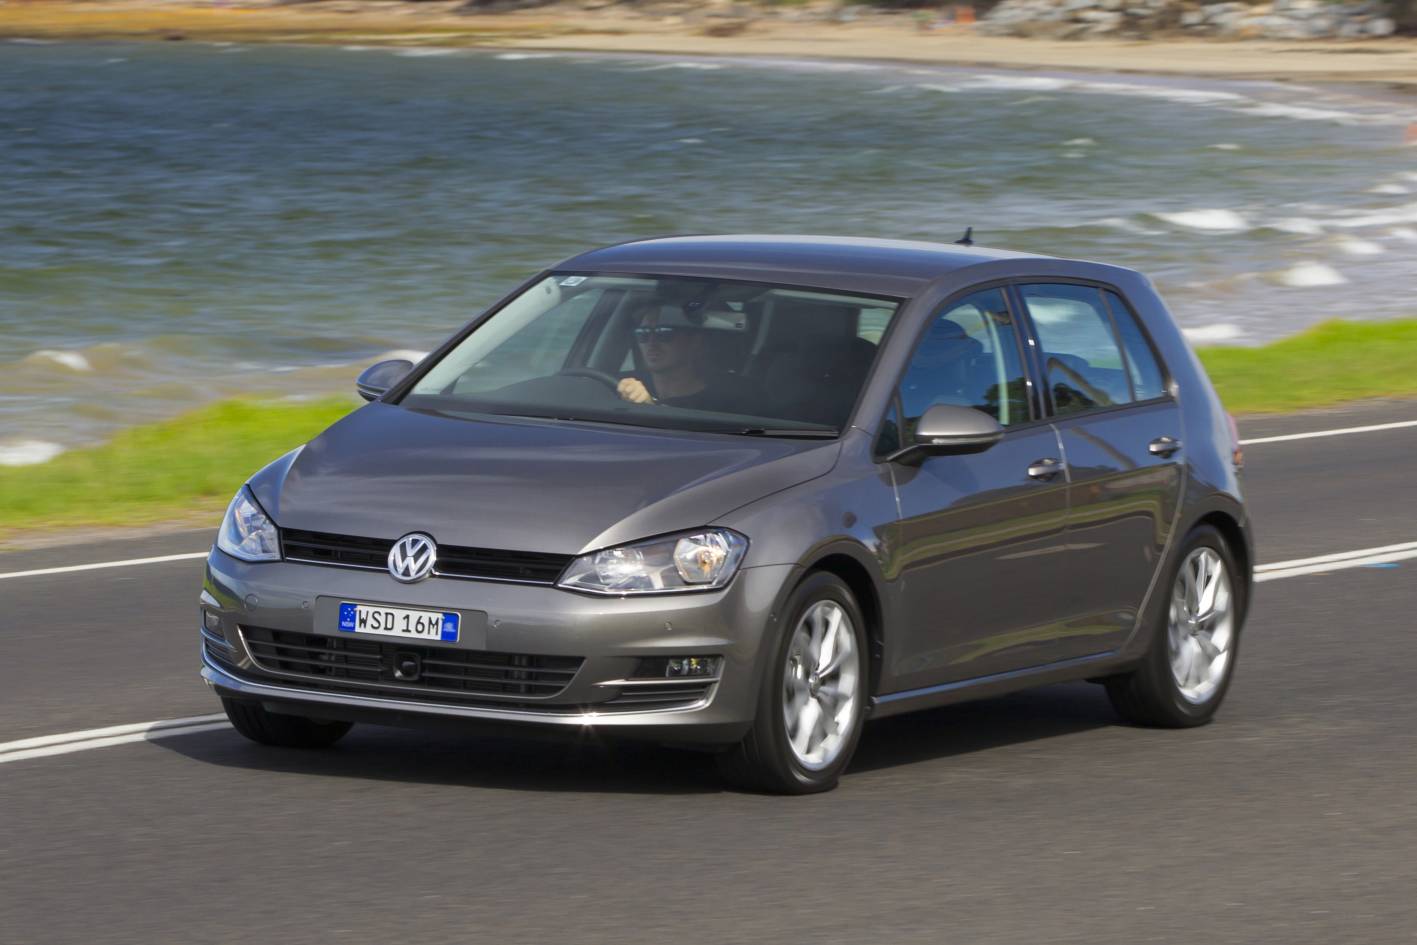 Volkswagen Cars News 2013 Mk7 Golf launched in Australia